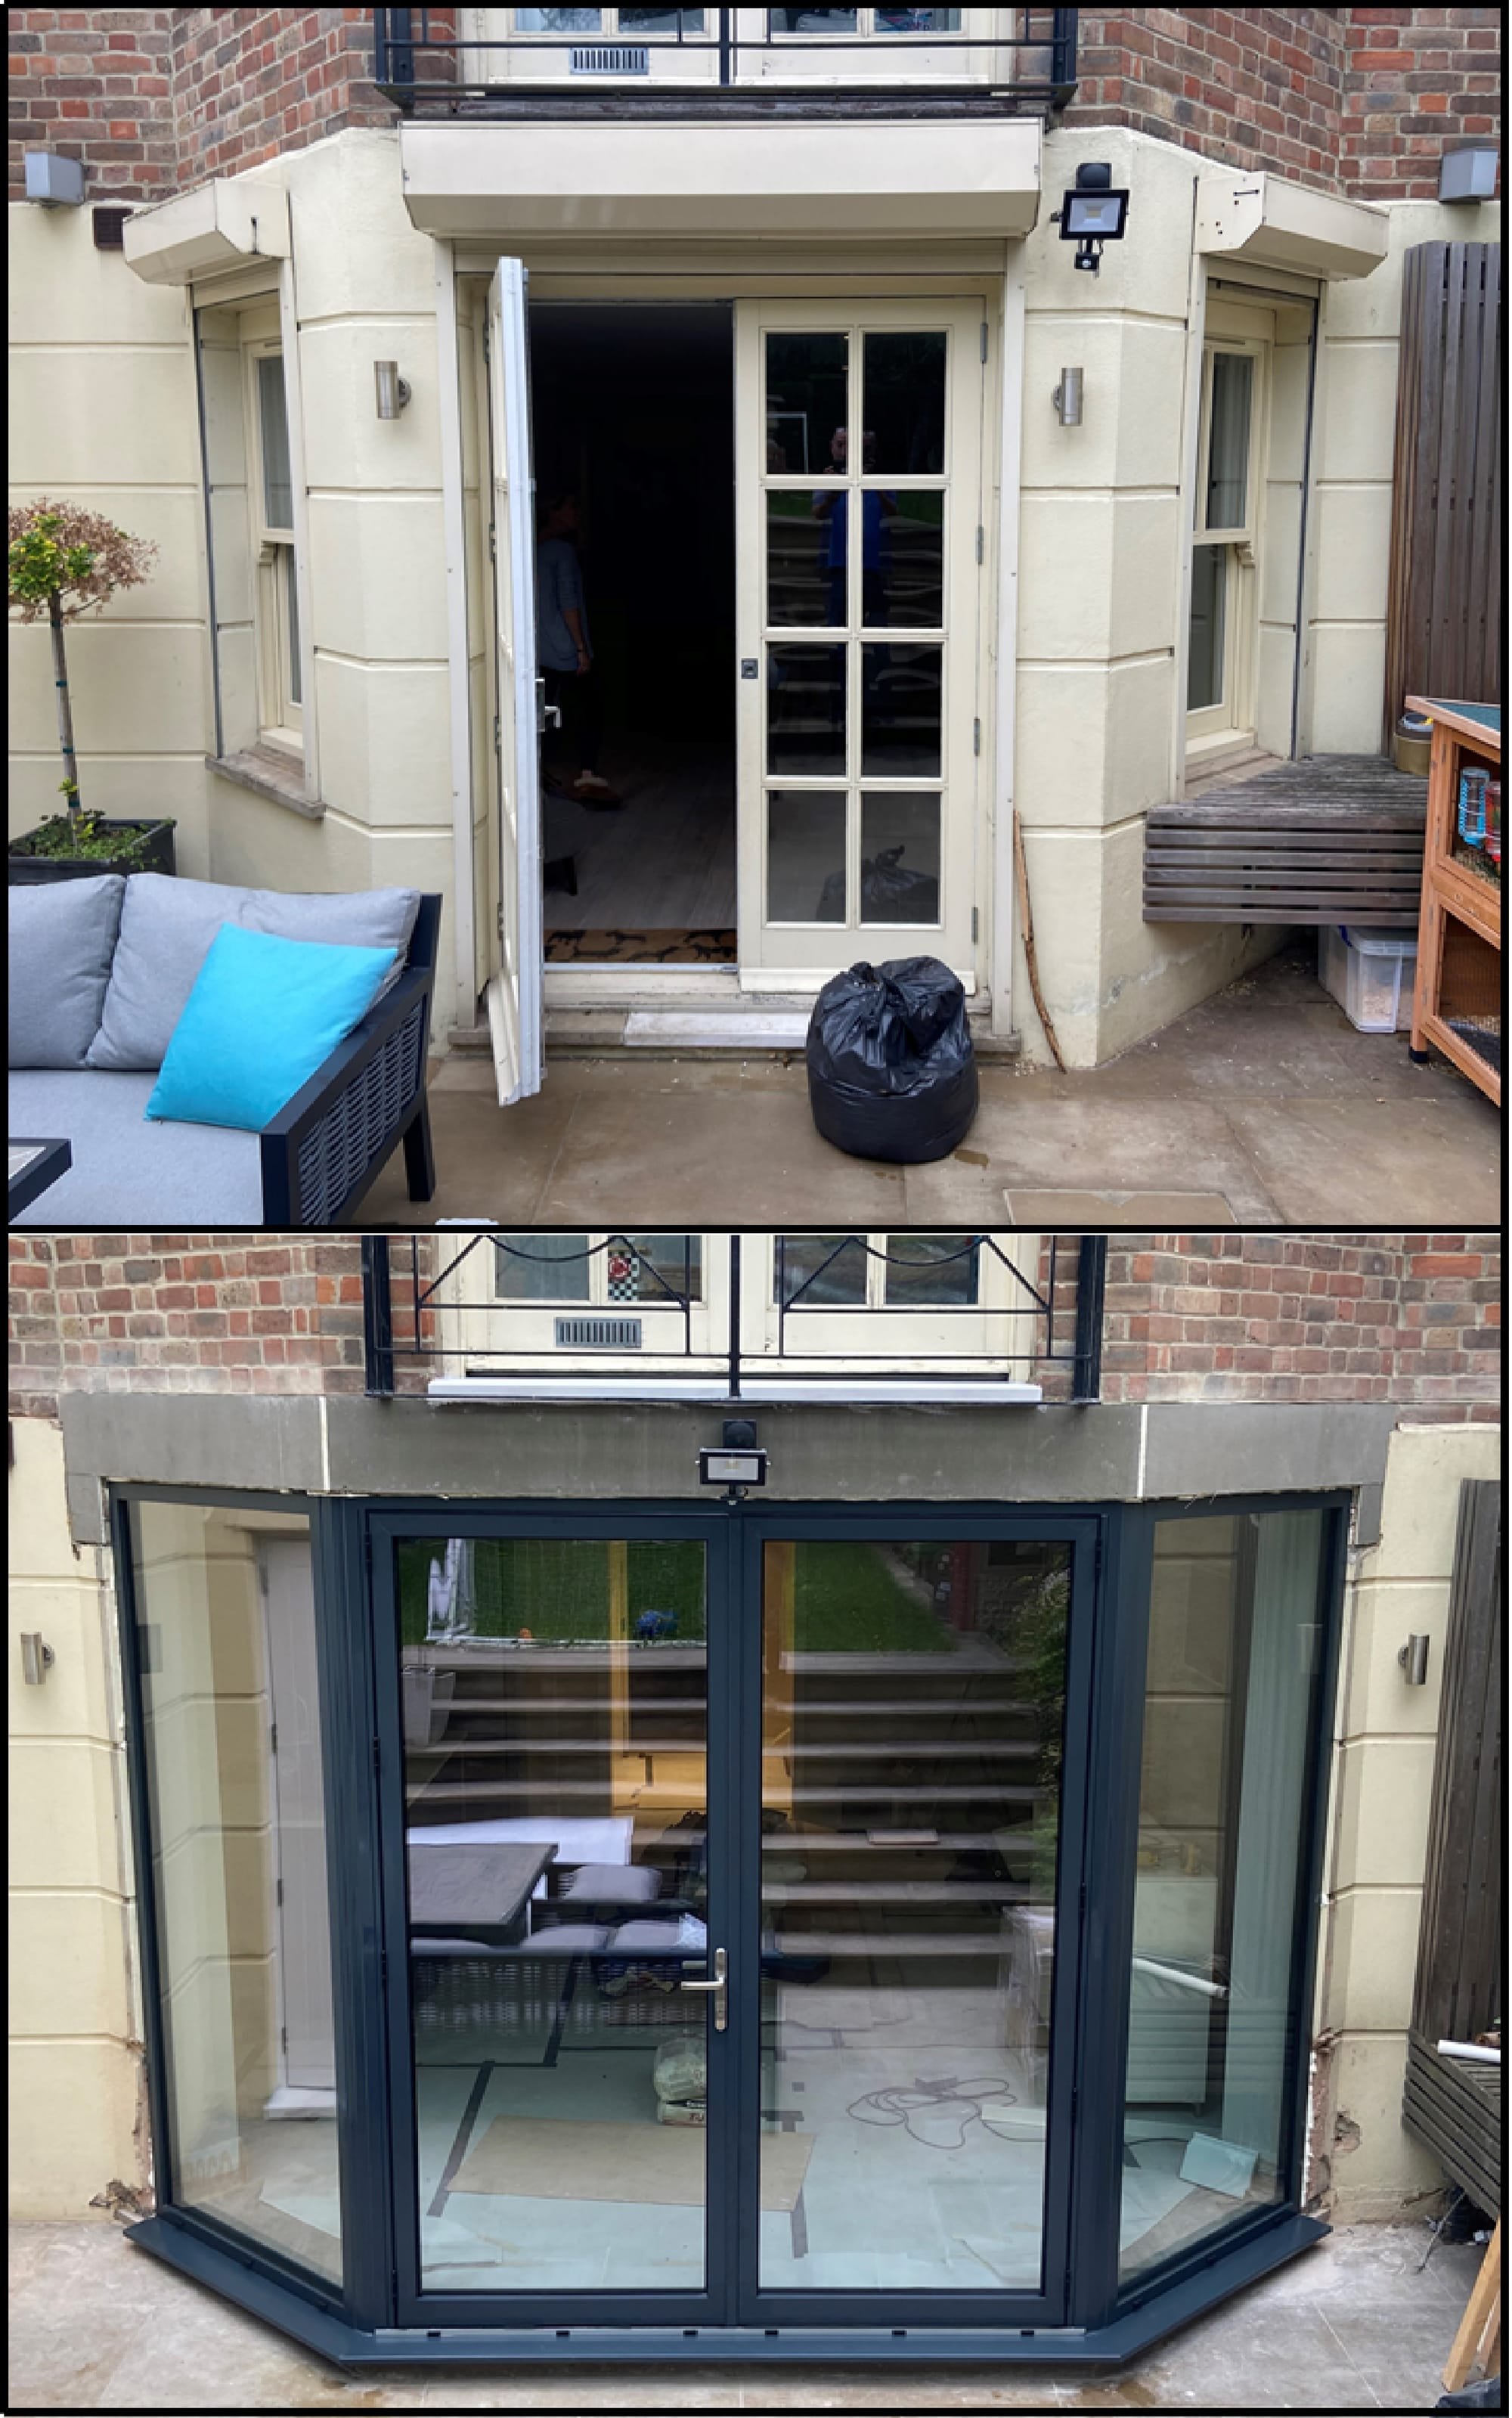 Before and after kitchen refurbishment works in Clapham, SW11